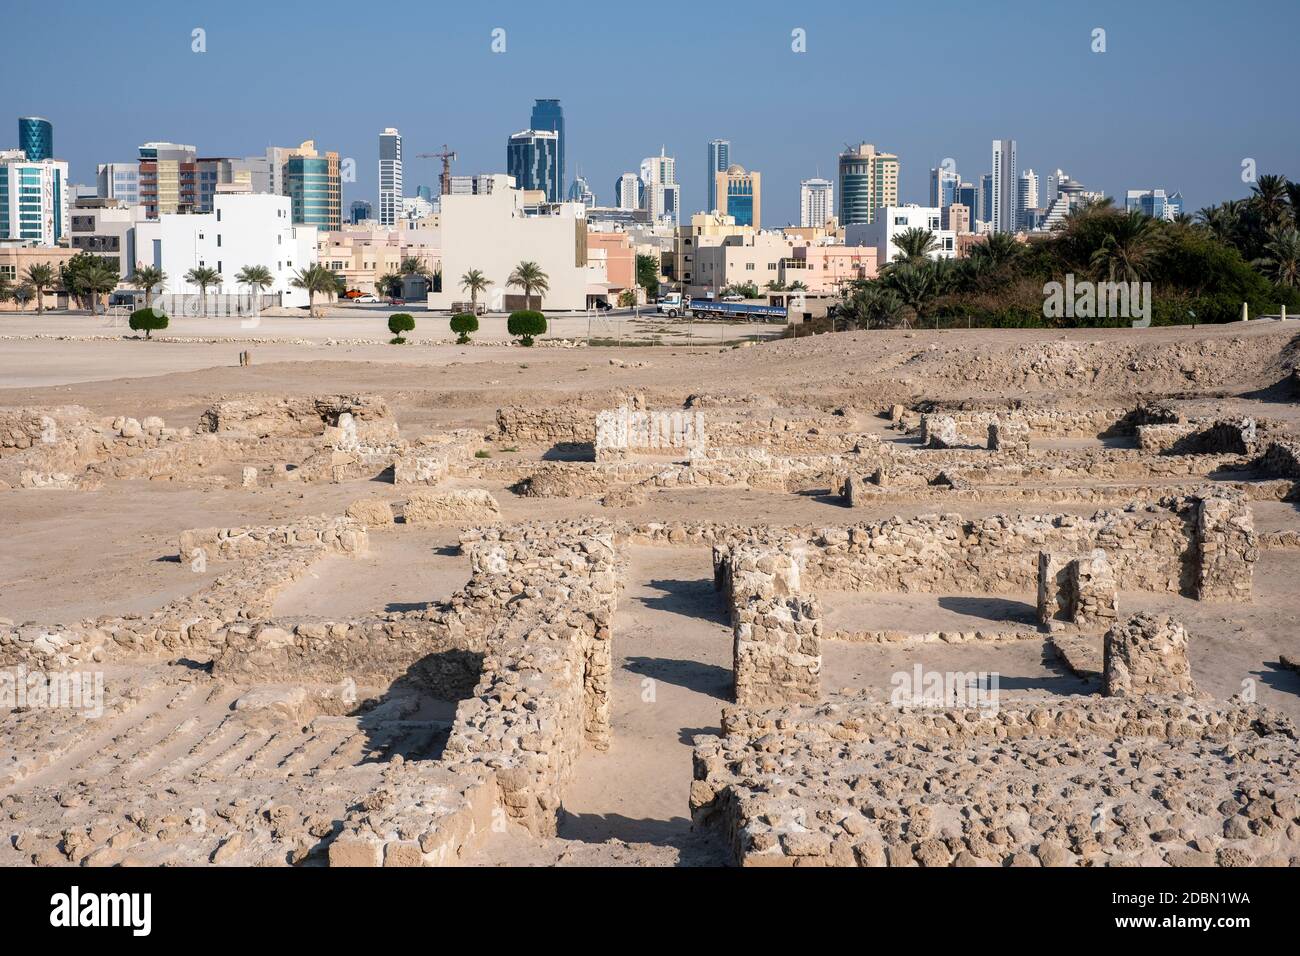 The modern city of Manama, Bahrain viewed from the ruins of the Bahrain fort Stock Photo